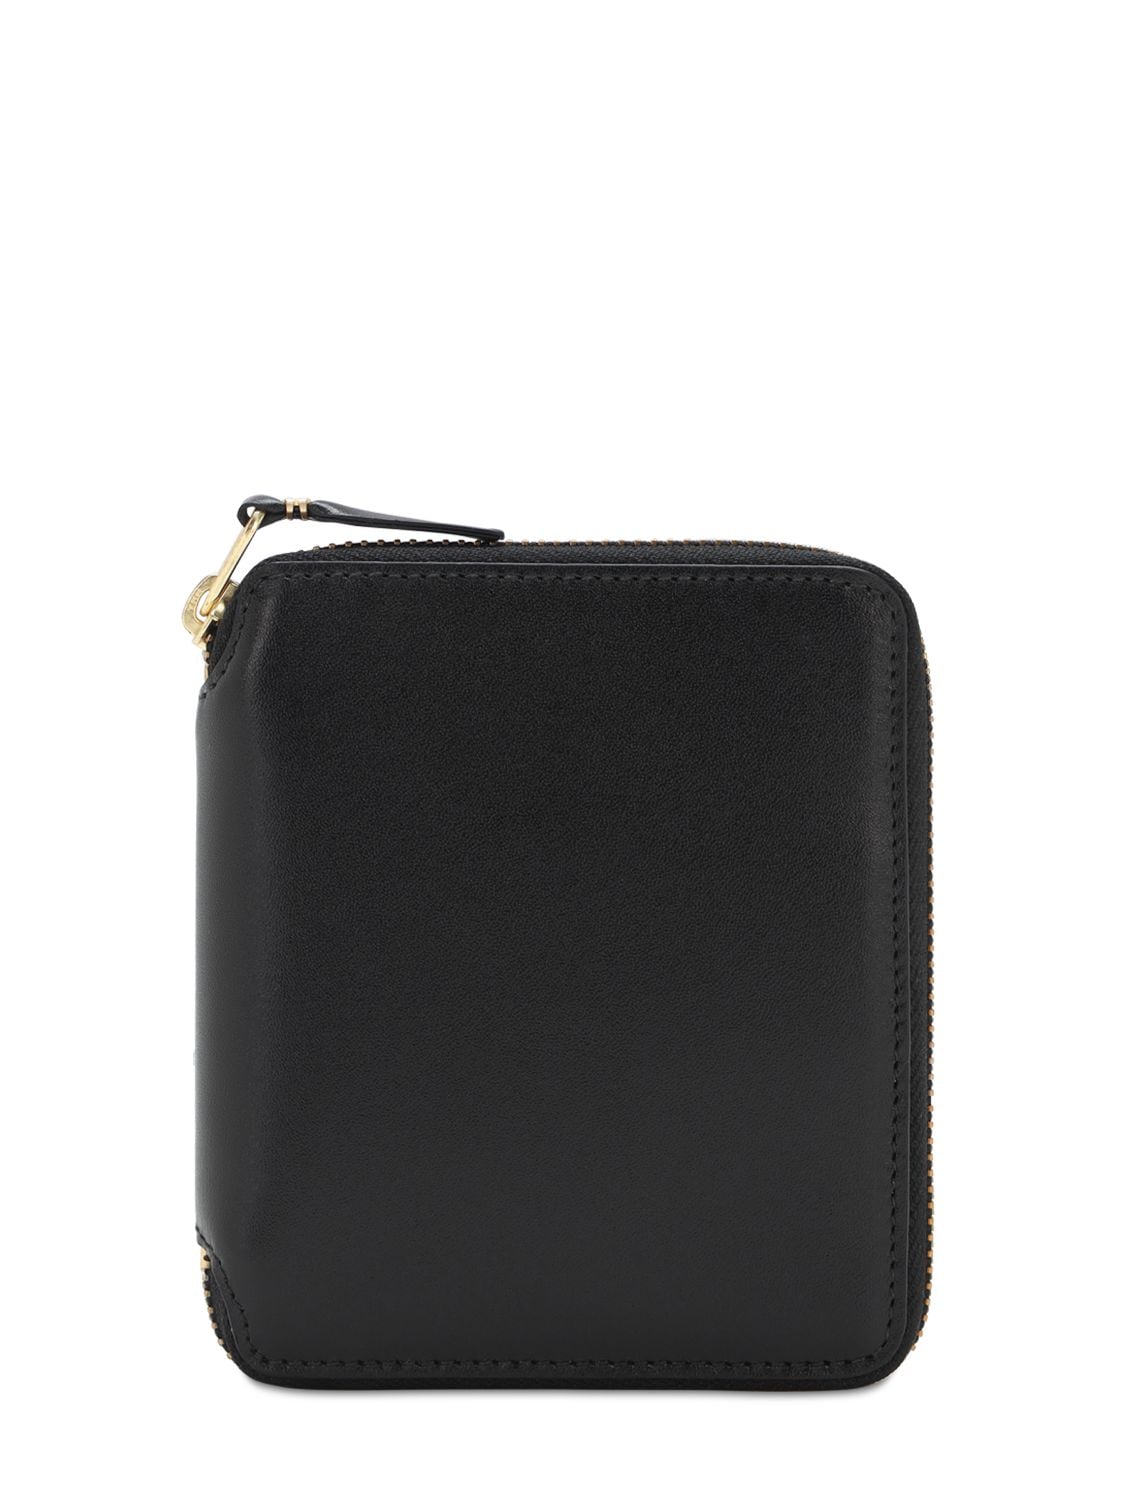 Image of Classic Leather Zip-around Wallet